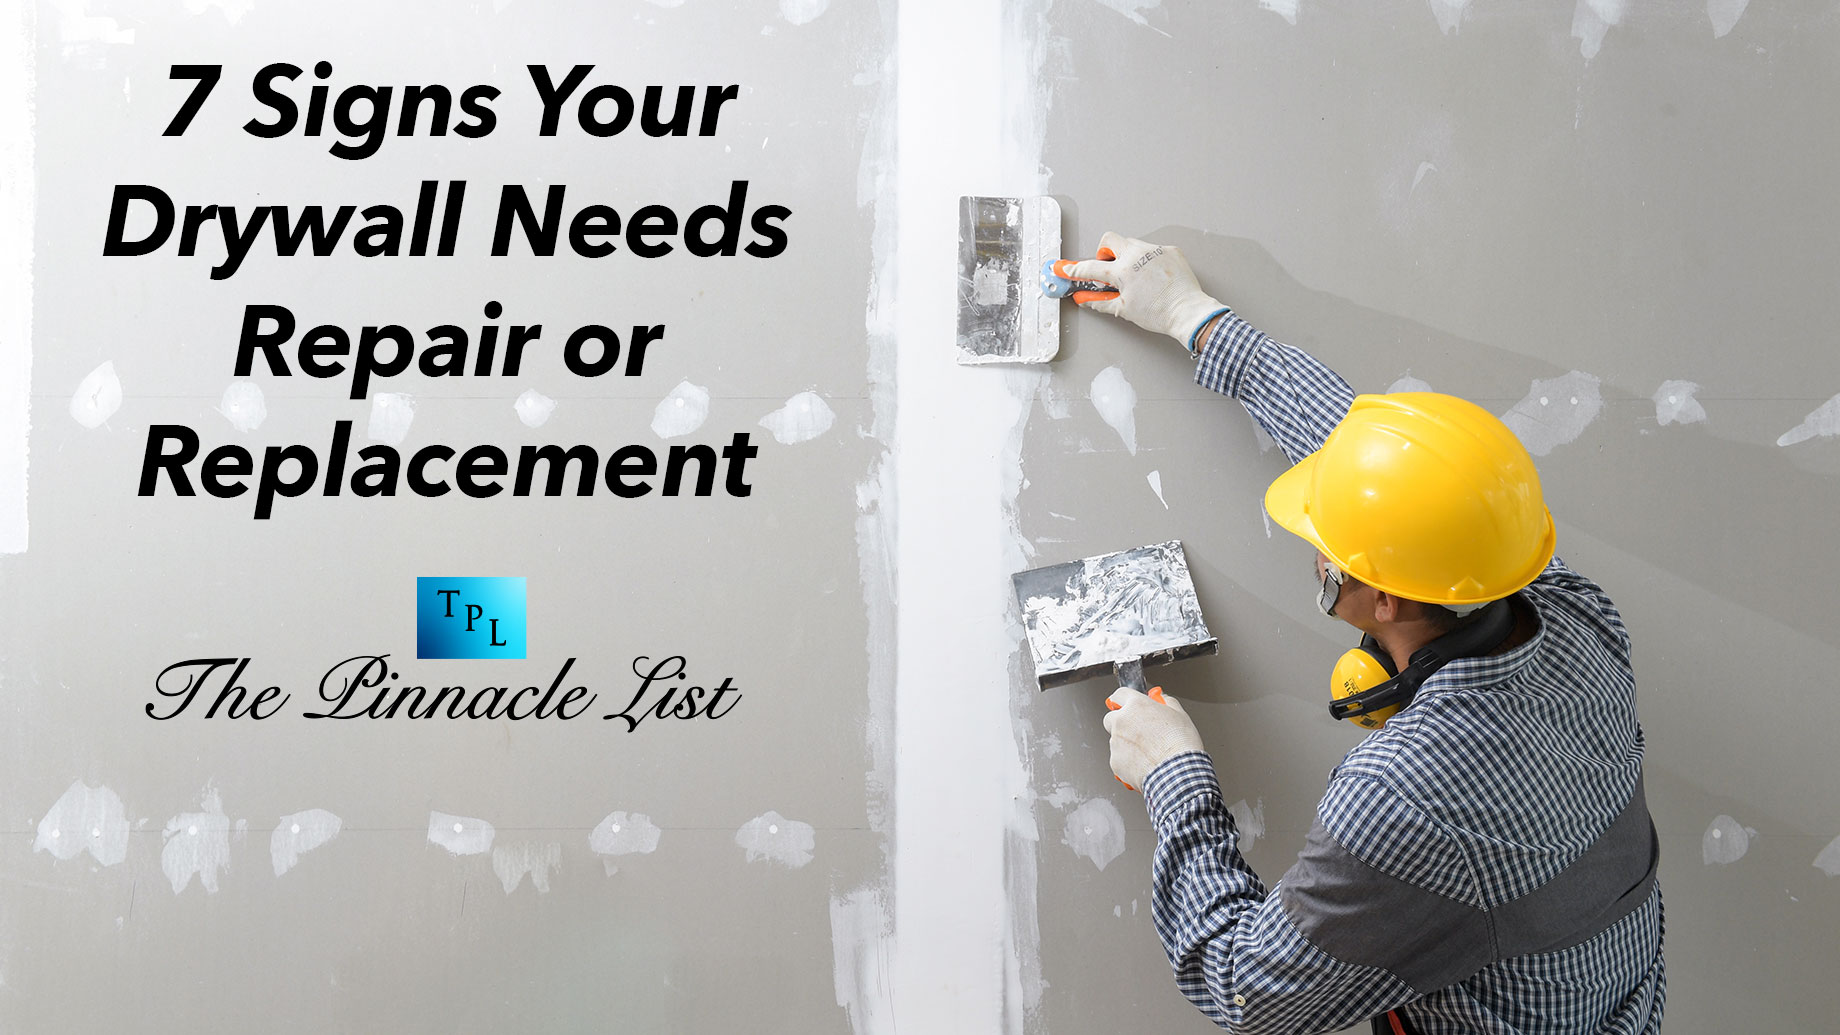 7 Signs Your Drywall Needs Repair or Replacement